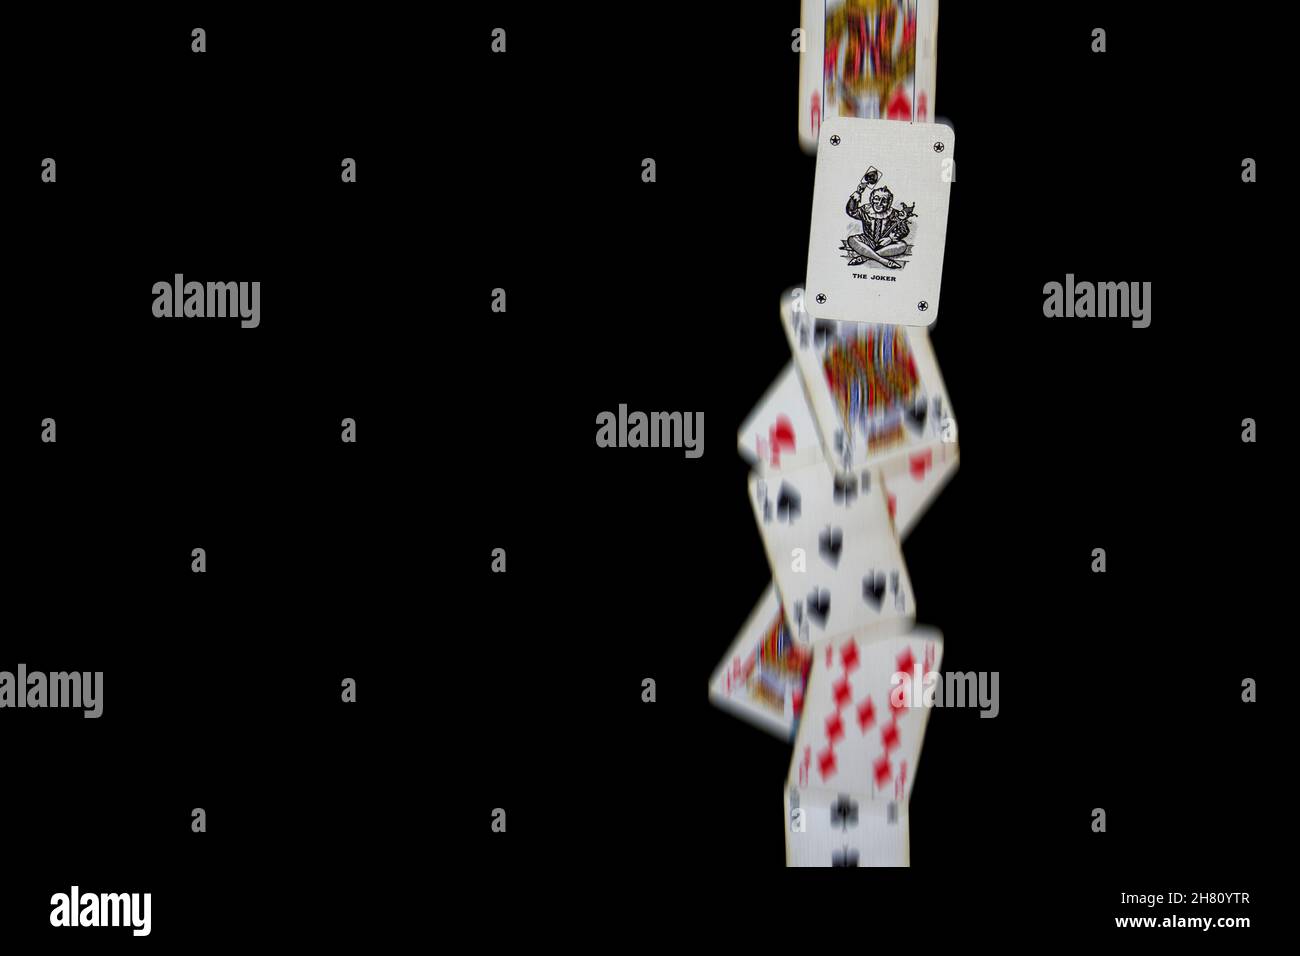 A line of playing cards fall against a black background, with the joker frozen to show it is different to the other cards. Landscape orientation. Stock Photo